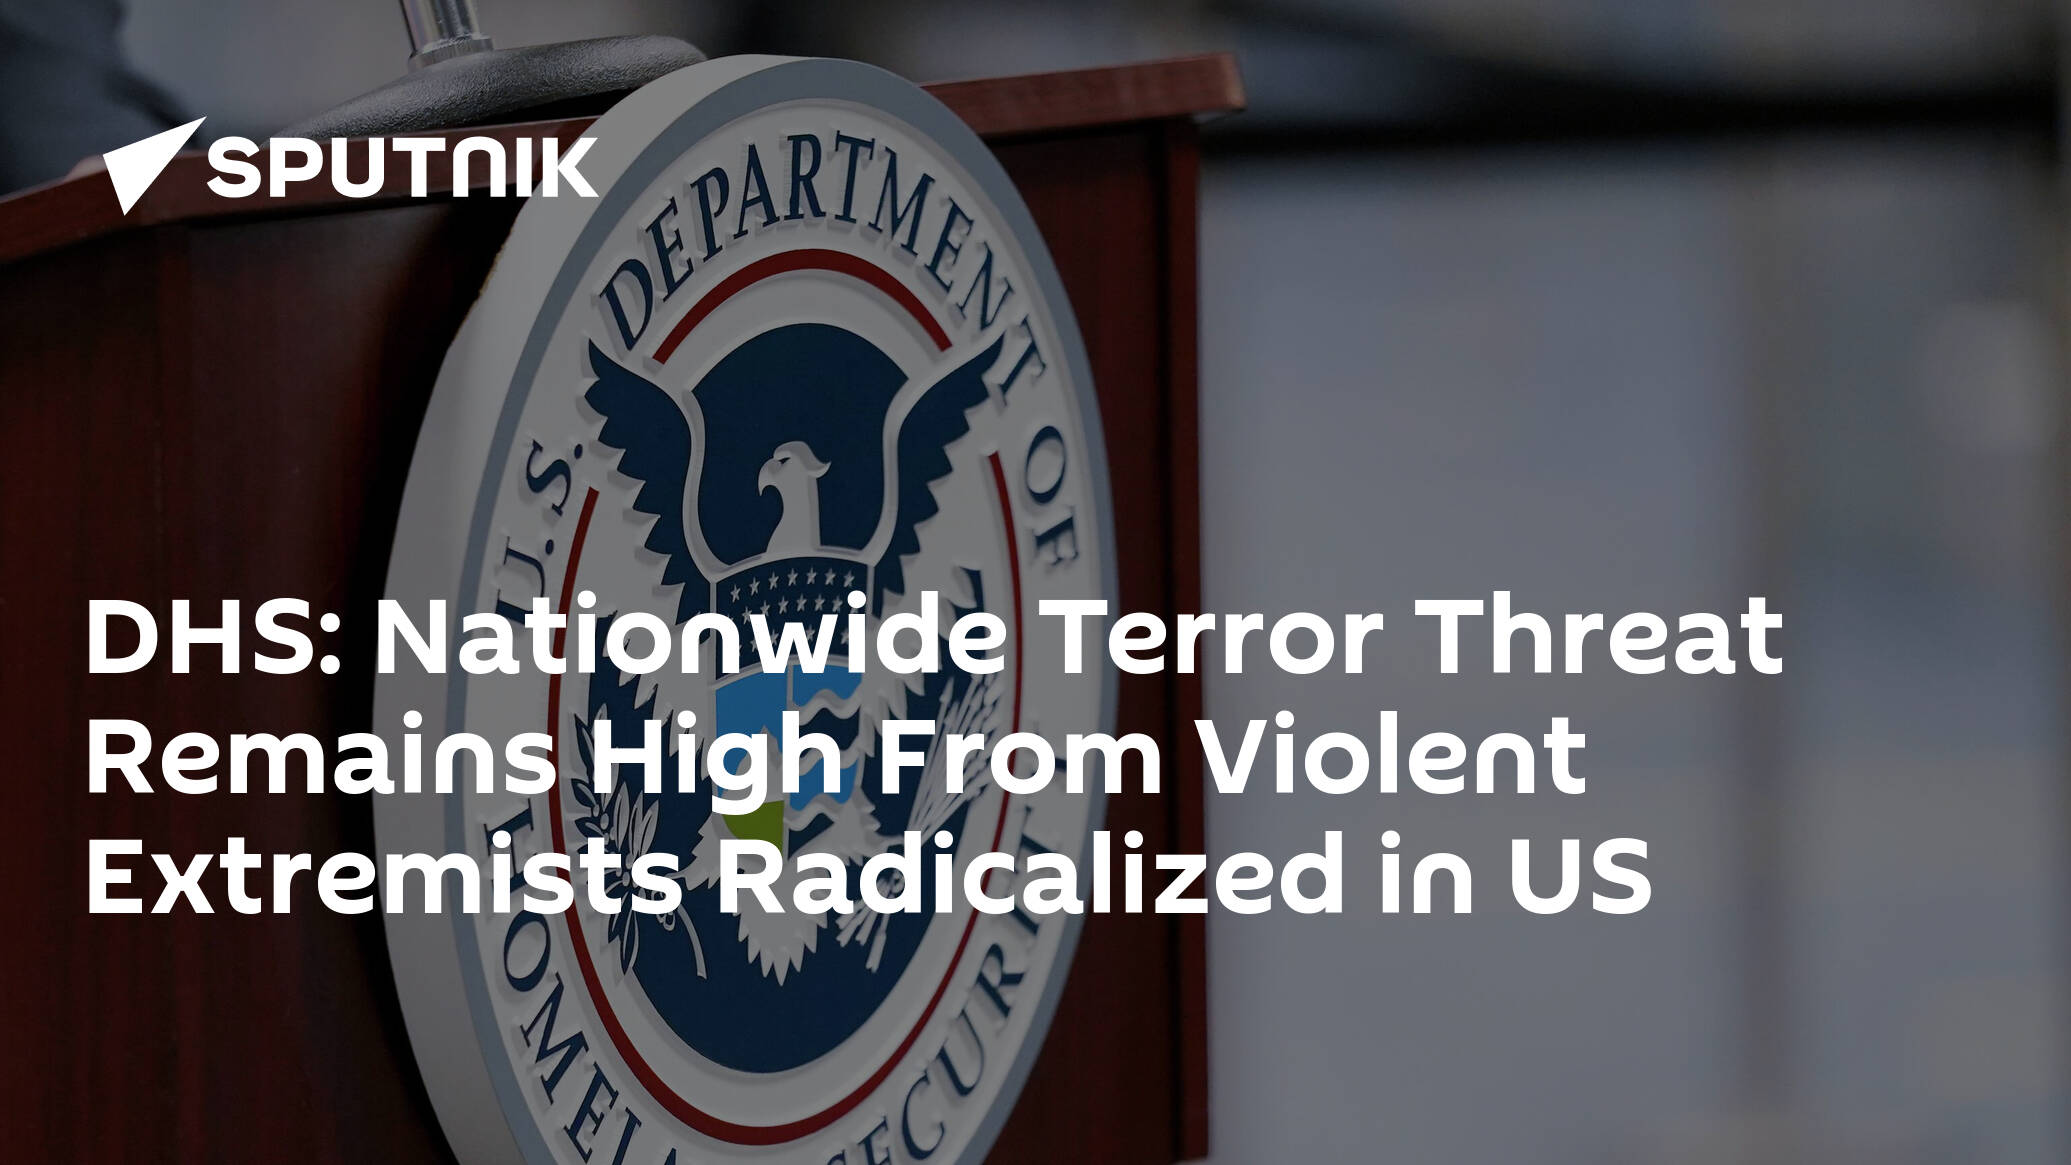 DHS: Nationwide Terror Threat Remains High From Violent Extremists Radicalized in US